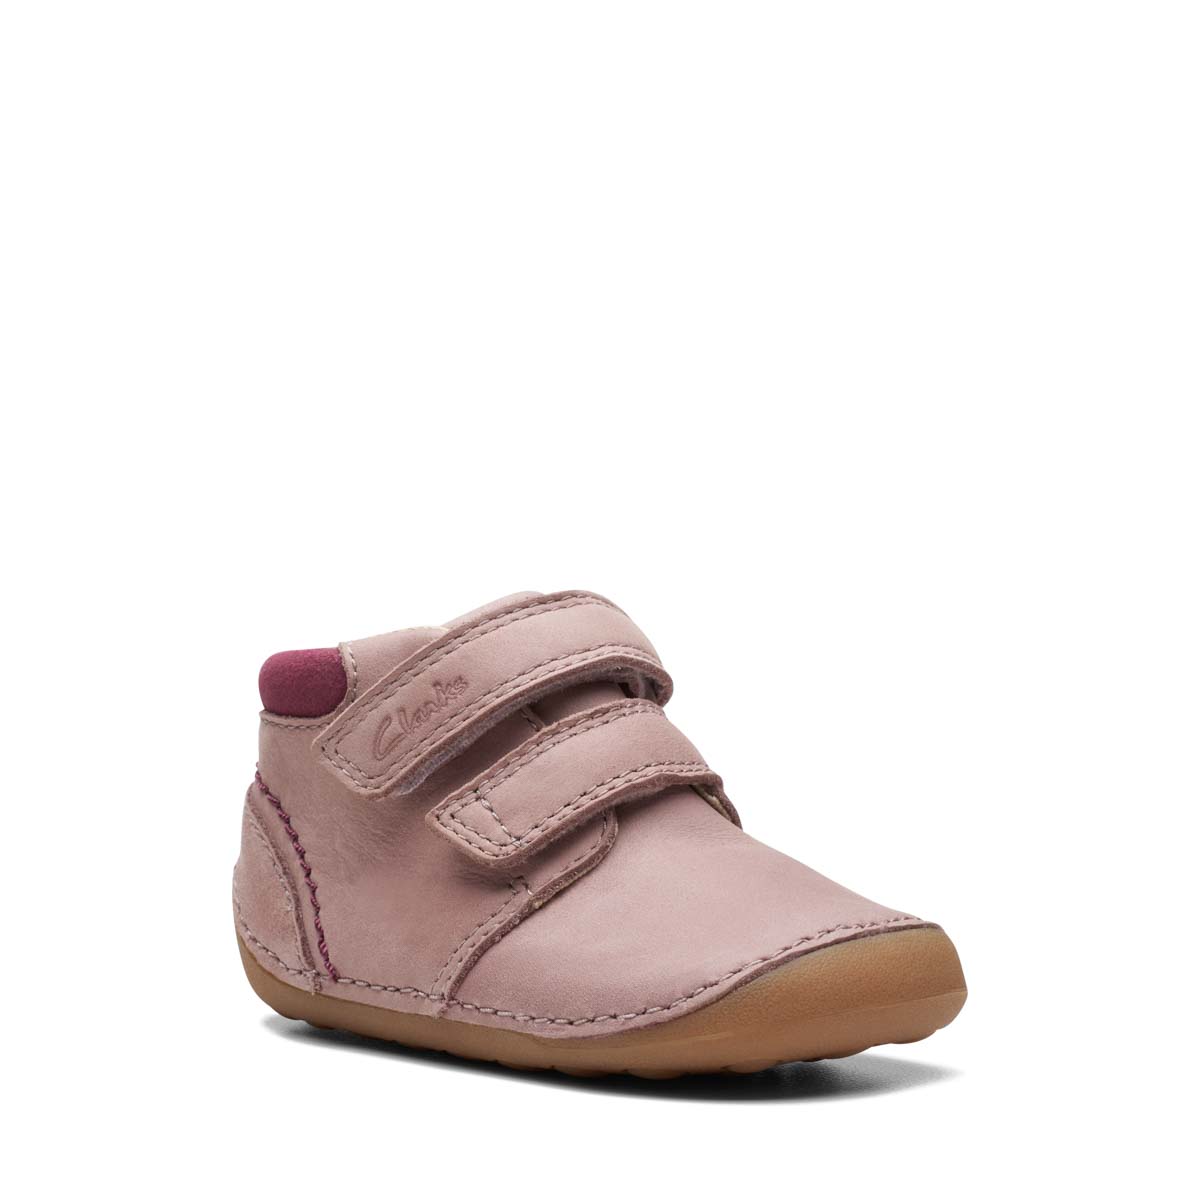 Clarks Tiny Play Boot Pink Leather Kids girls first and baby shoes 7545-06F in a Plain Leather in Size 2.5